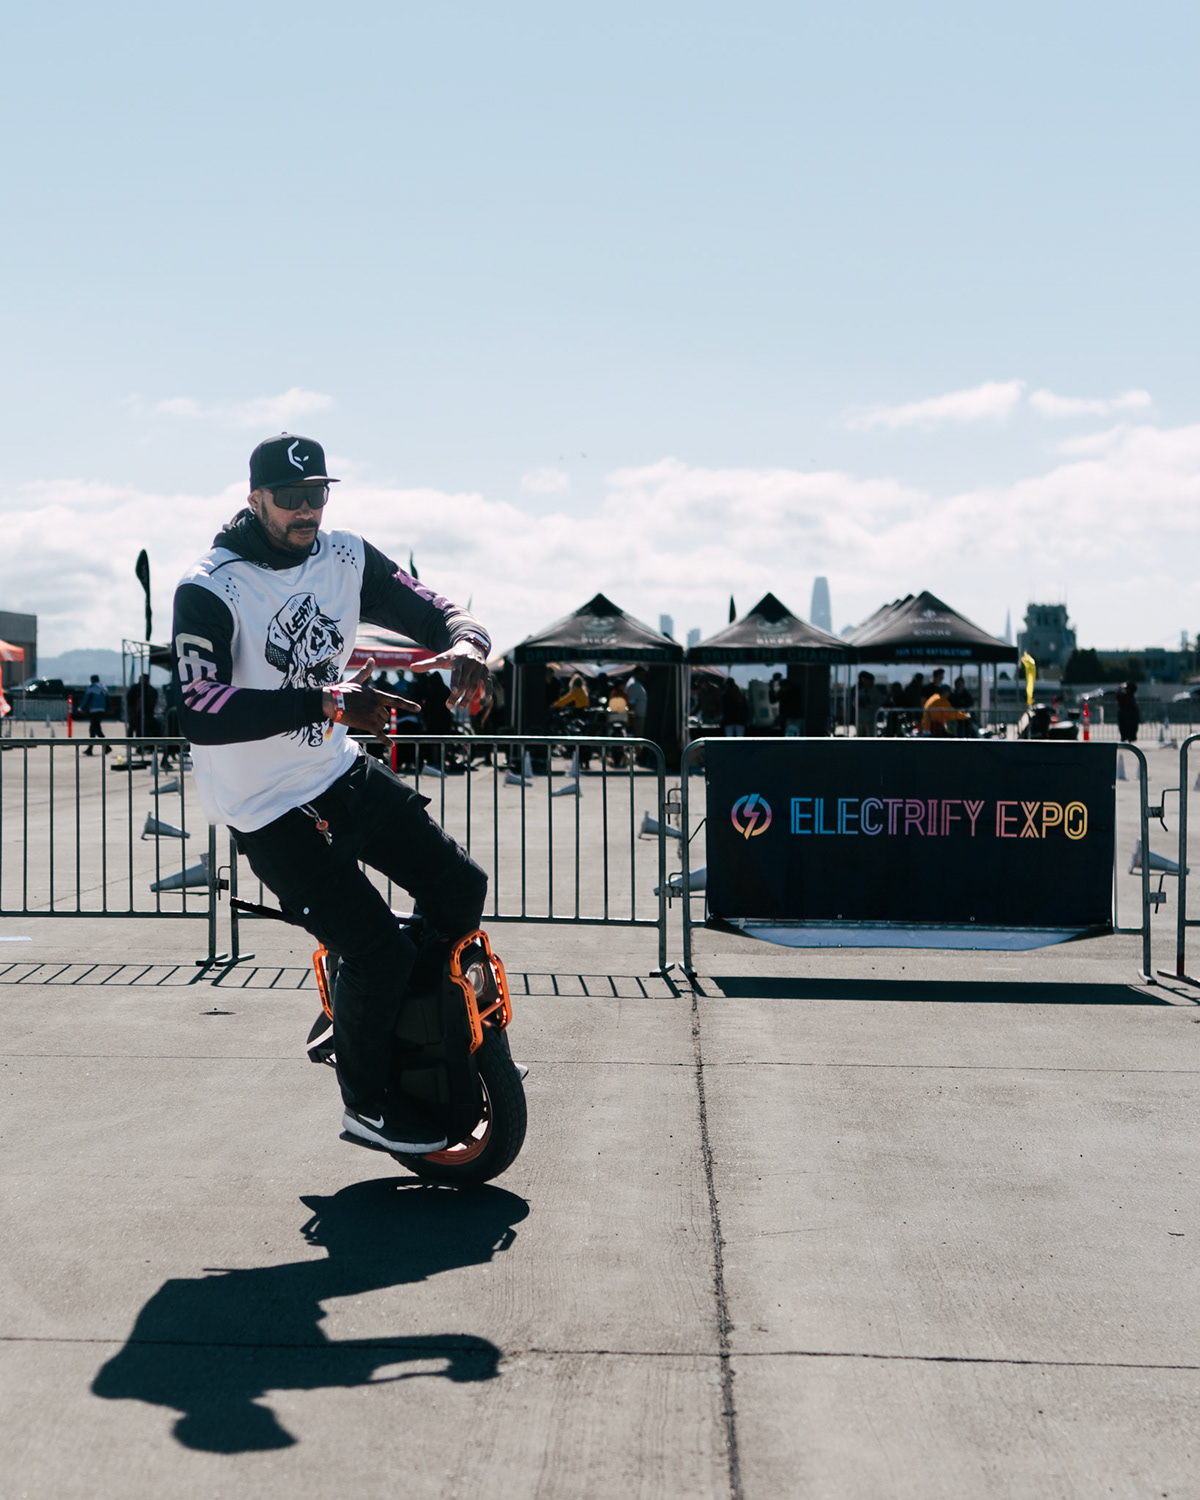 Outdoor sports electric unicycle race Photography 